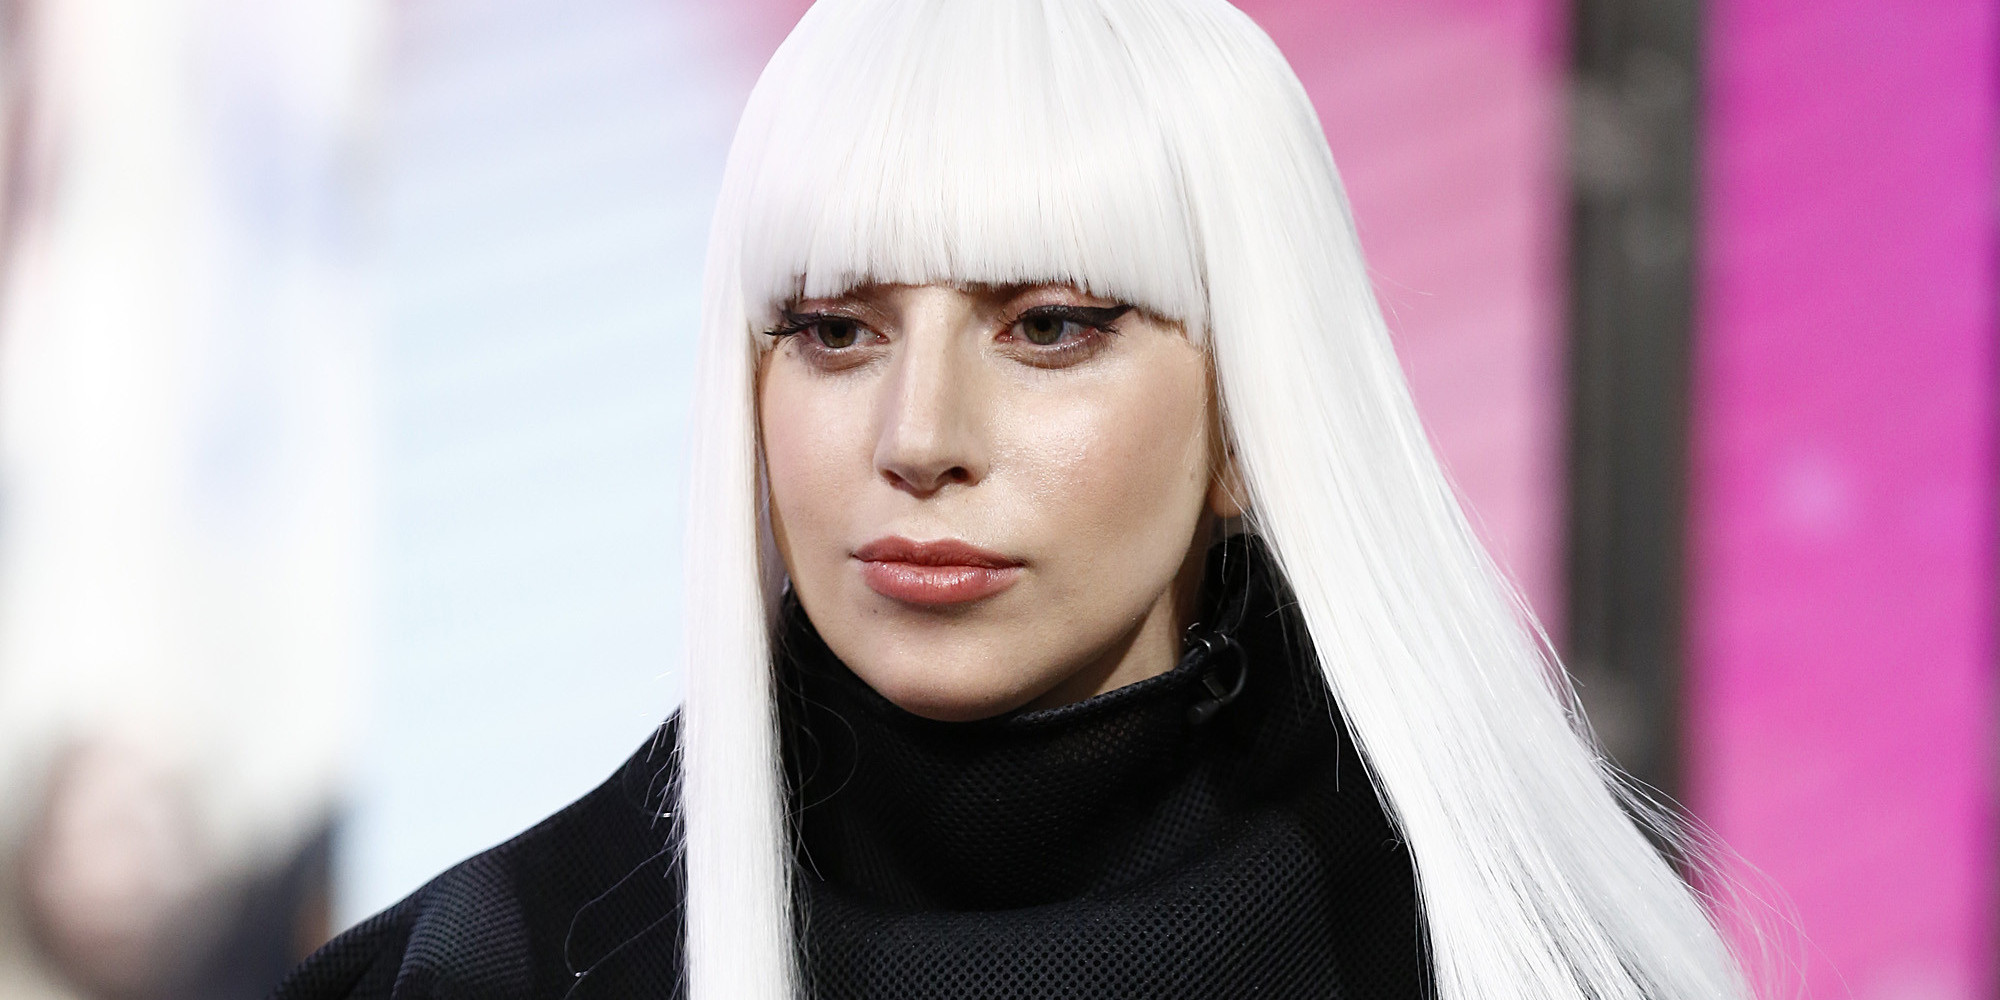 Updatefavoritemost Hated Wighair Of 2015 Page 2 Gaga Thoughts